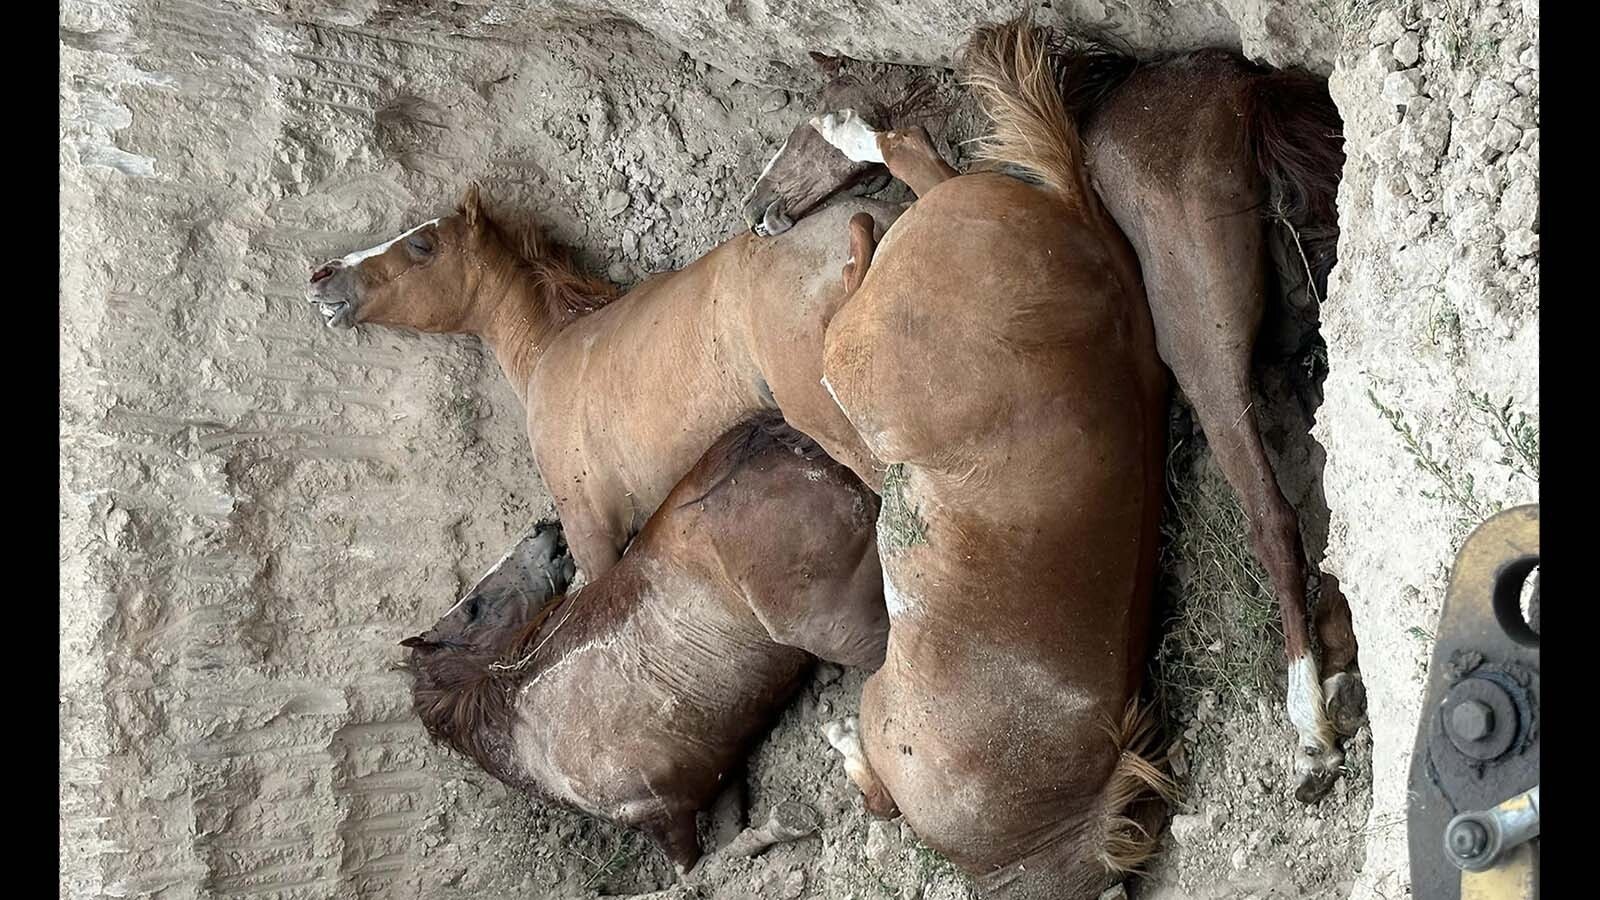 These four horses owned by Joe and Lindsay Bright of Converse County, Wyoming, were found dead July 31. An investigation is ongoing, but the owners say they believe their horses were poisoned.